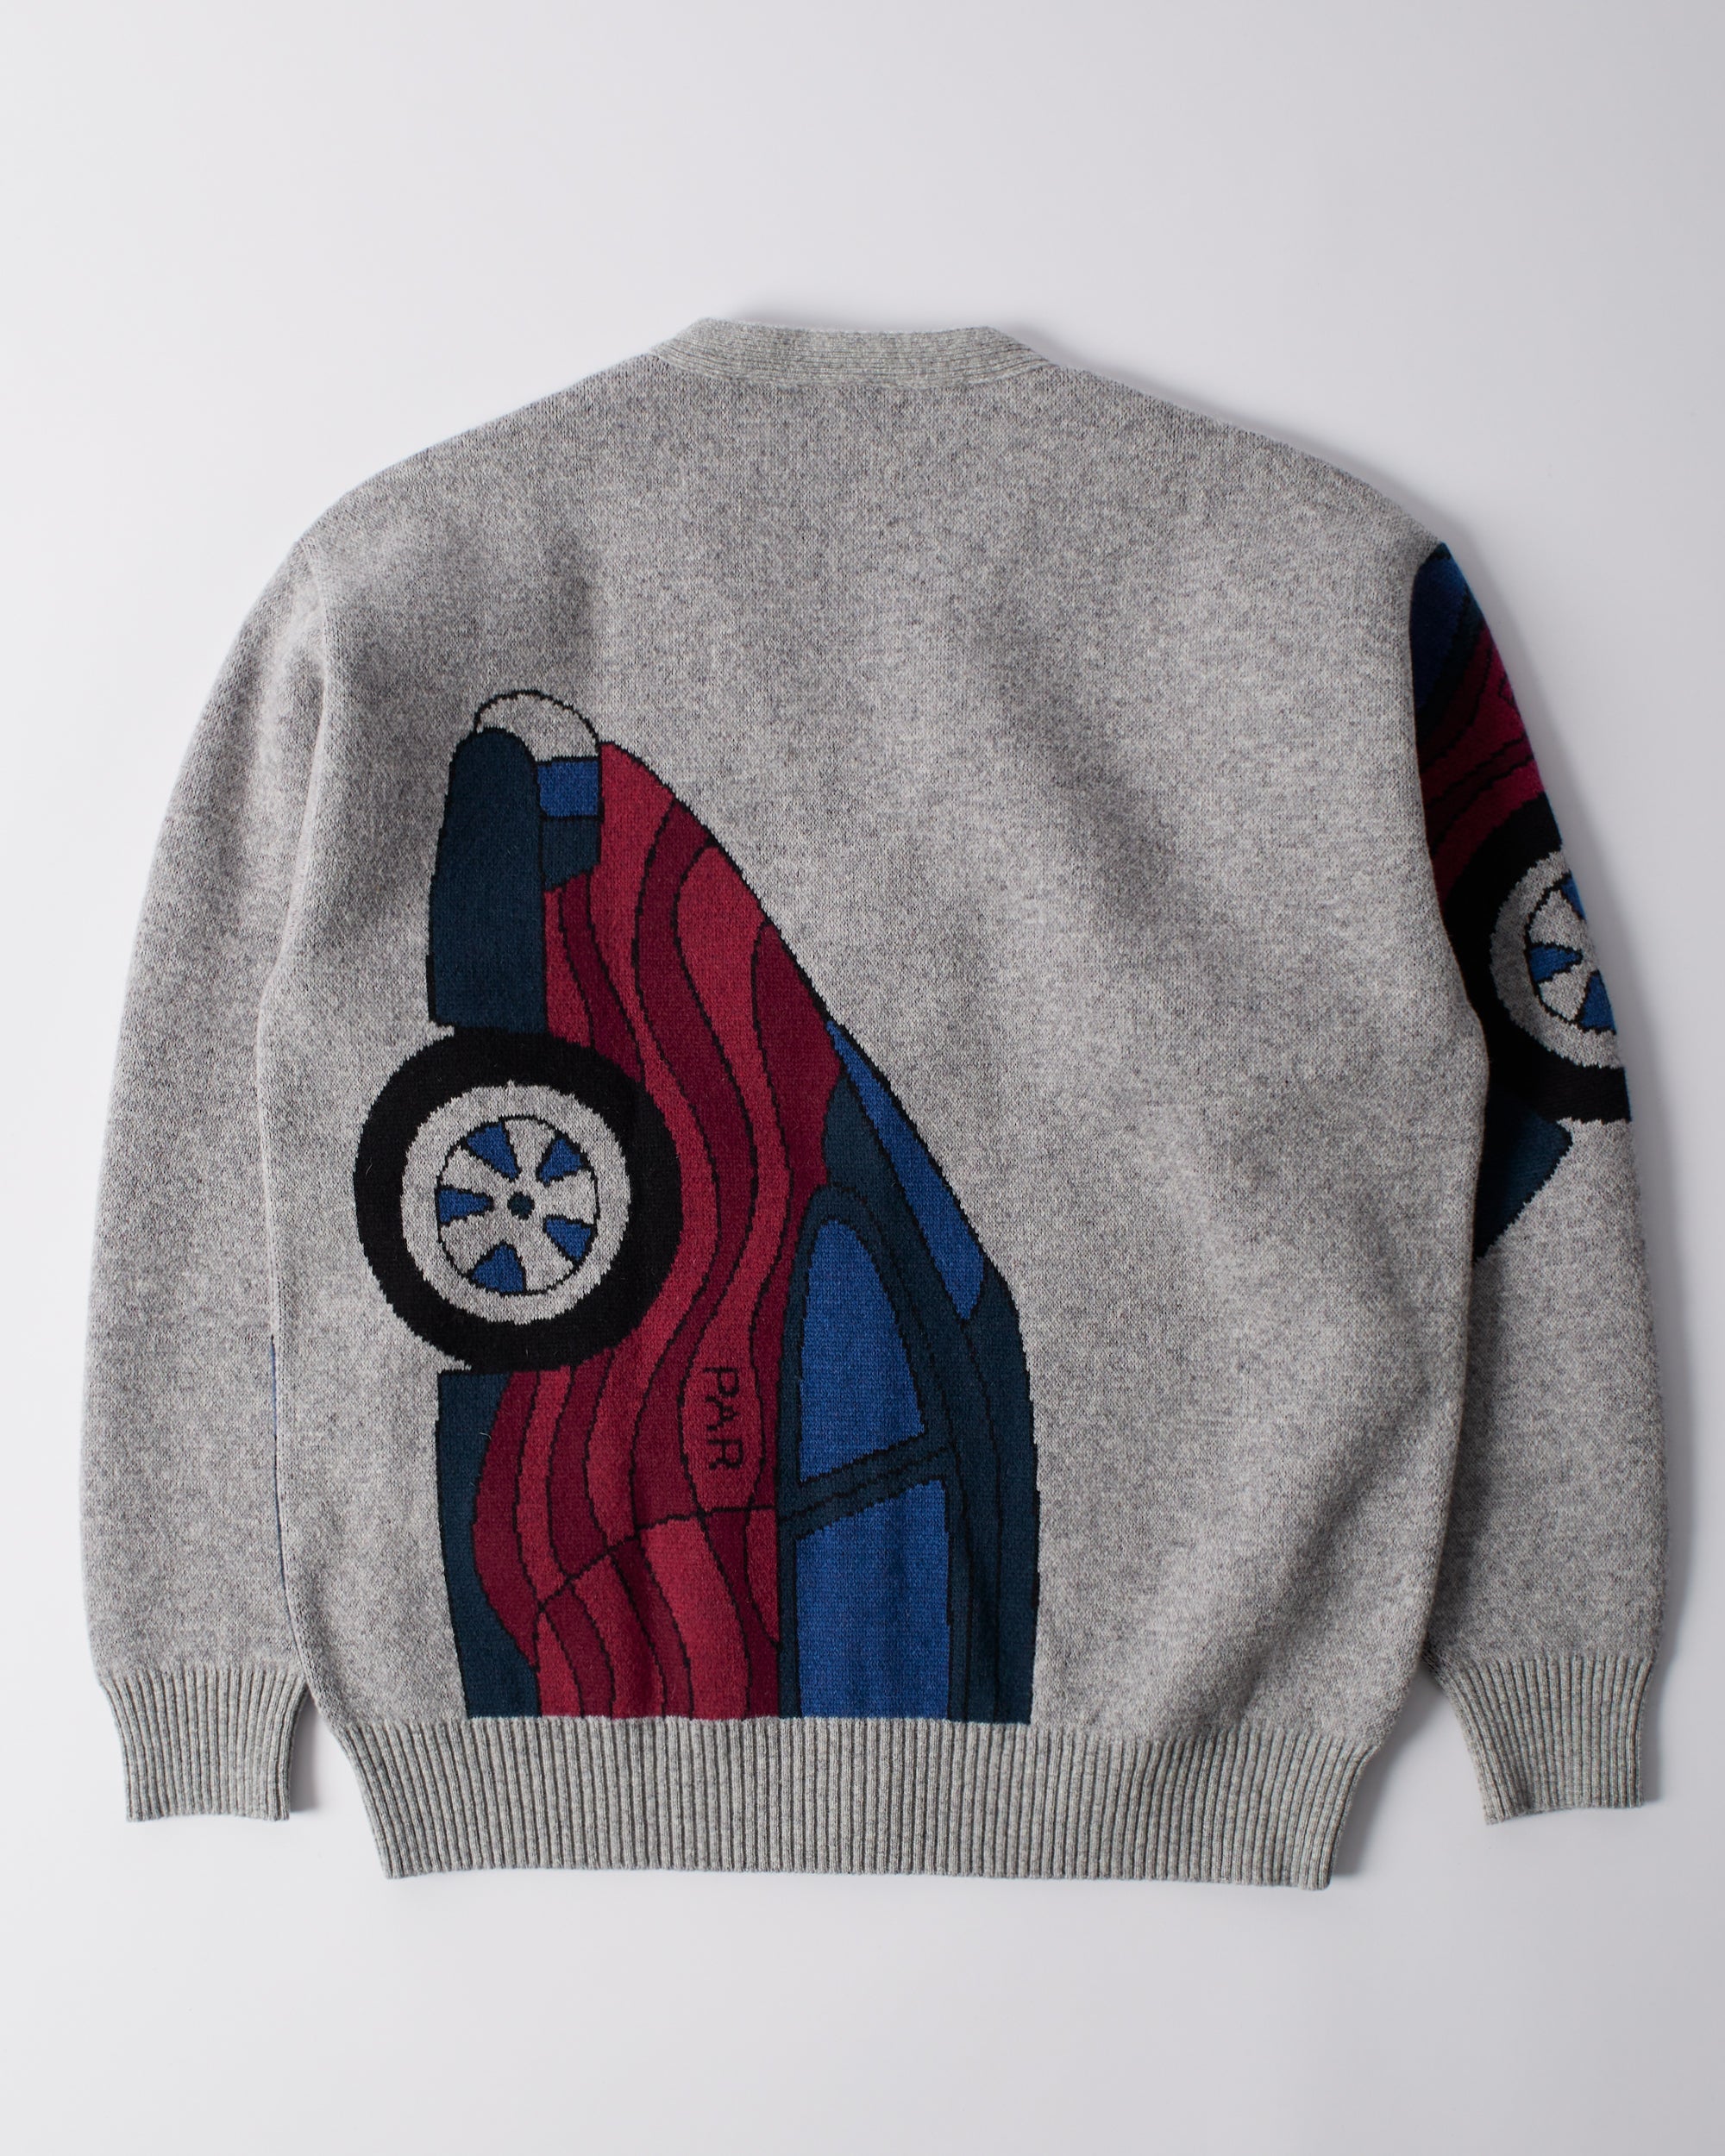 No parking knitted cardigan – by Parra USA